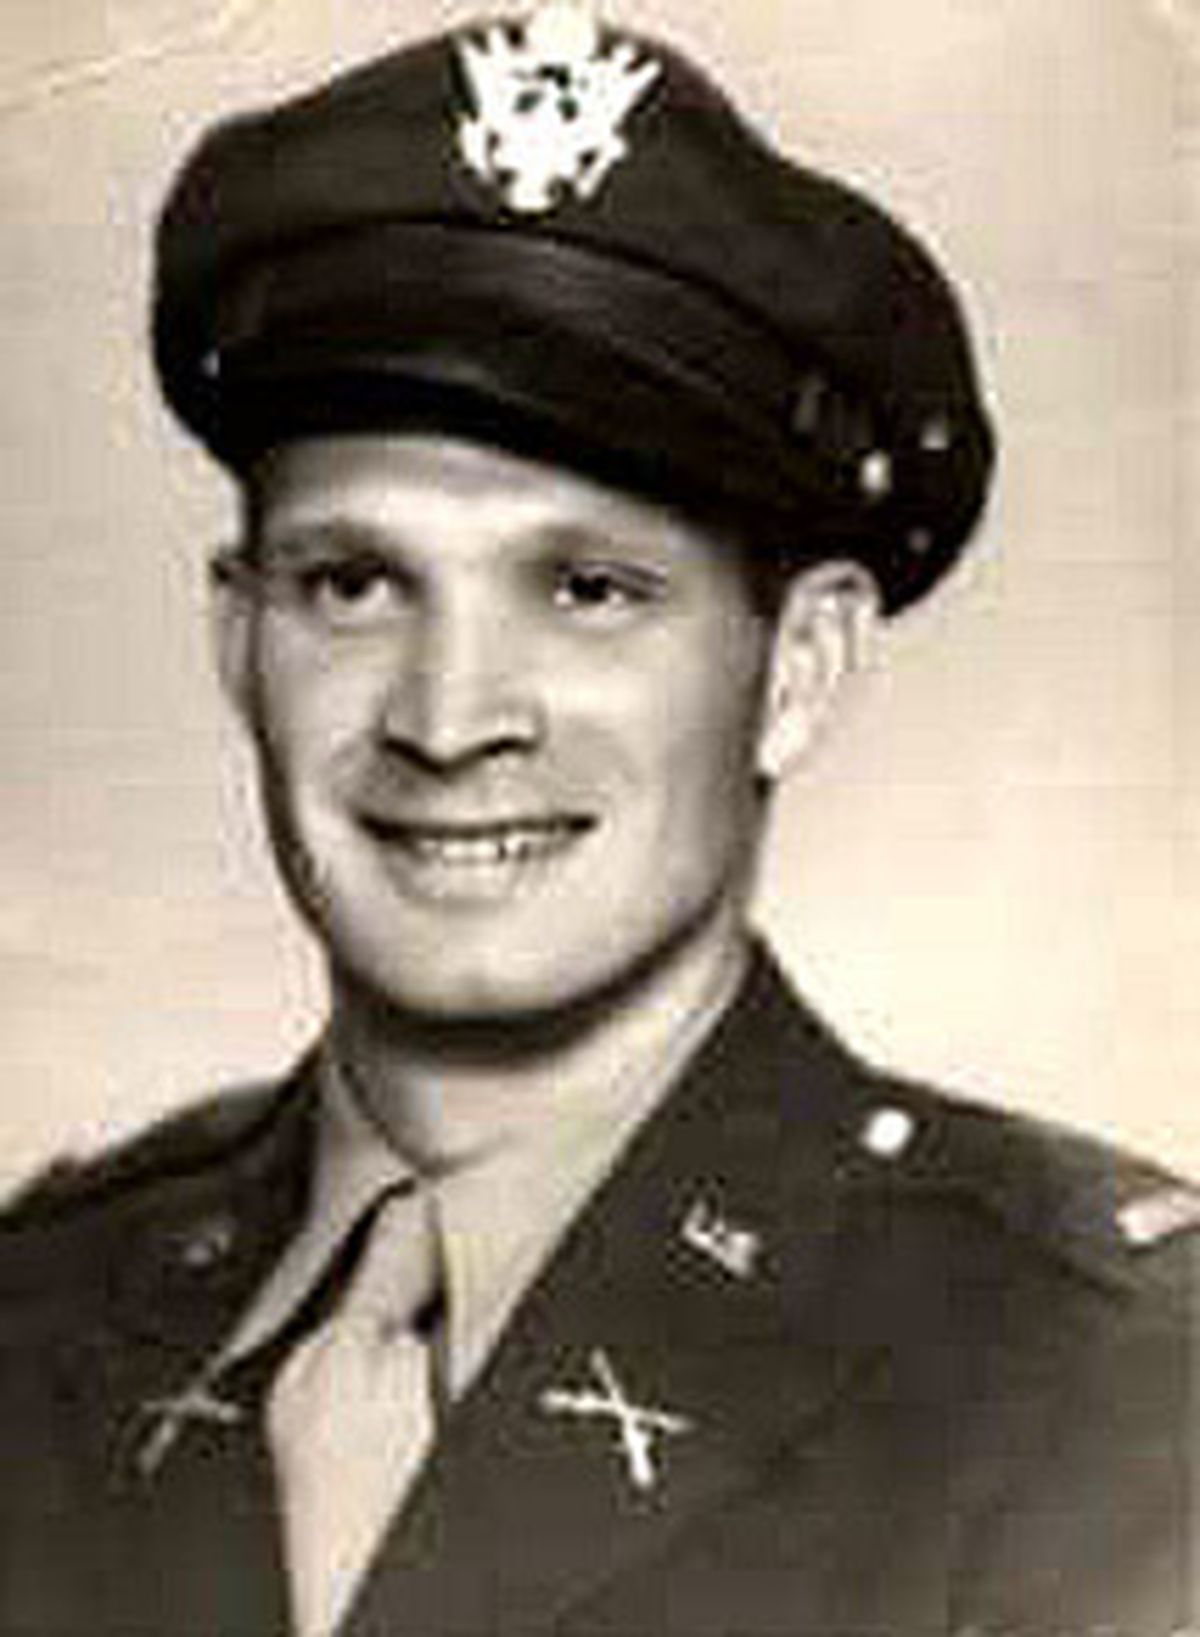 U.S. Army Capt. Melvin Stai was captured near Wonju during the Korean War in 1951 and was believed to have been killed in a U.S. air raid at the camp where he was being held prisoner. 
 ( Mike Stai / Courtesy photo)